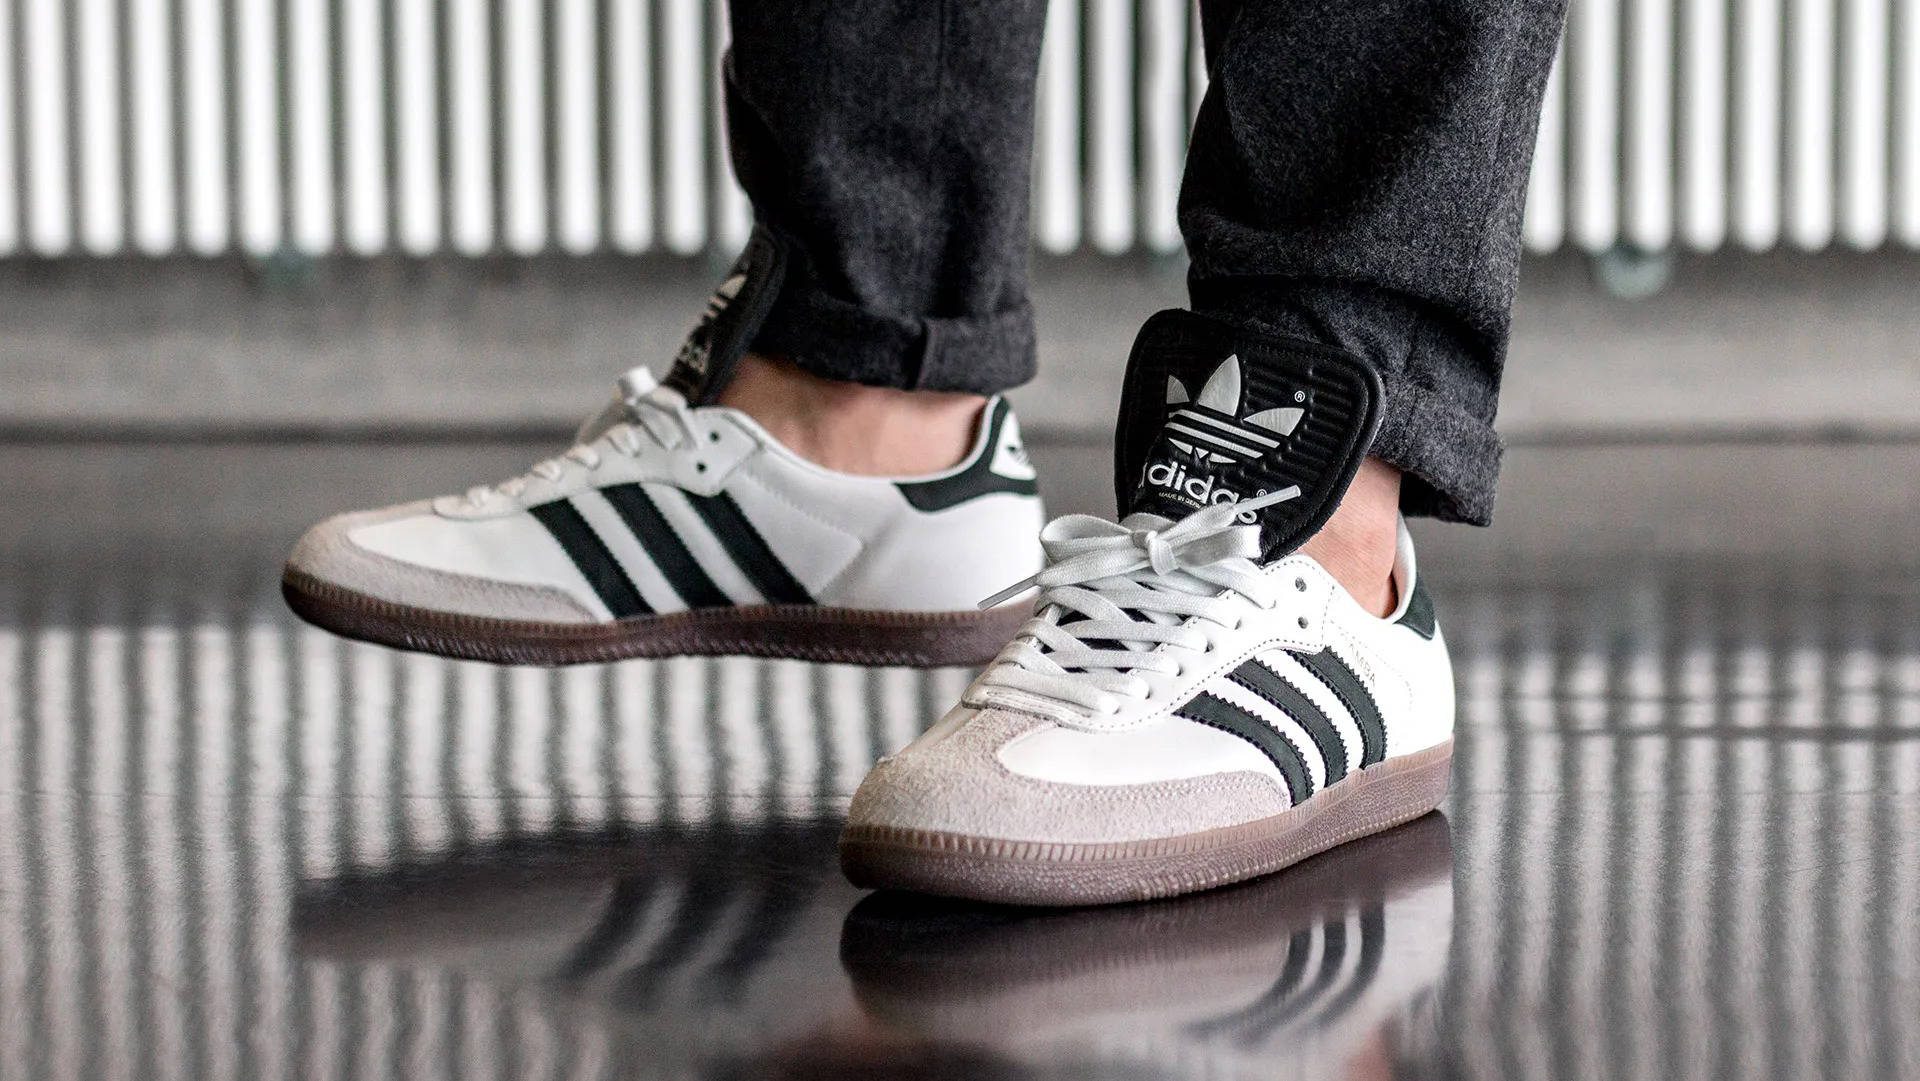 adidas Samba Sizing: How Do They Fit? | The Sole Supplier